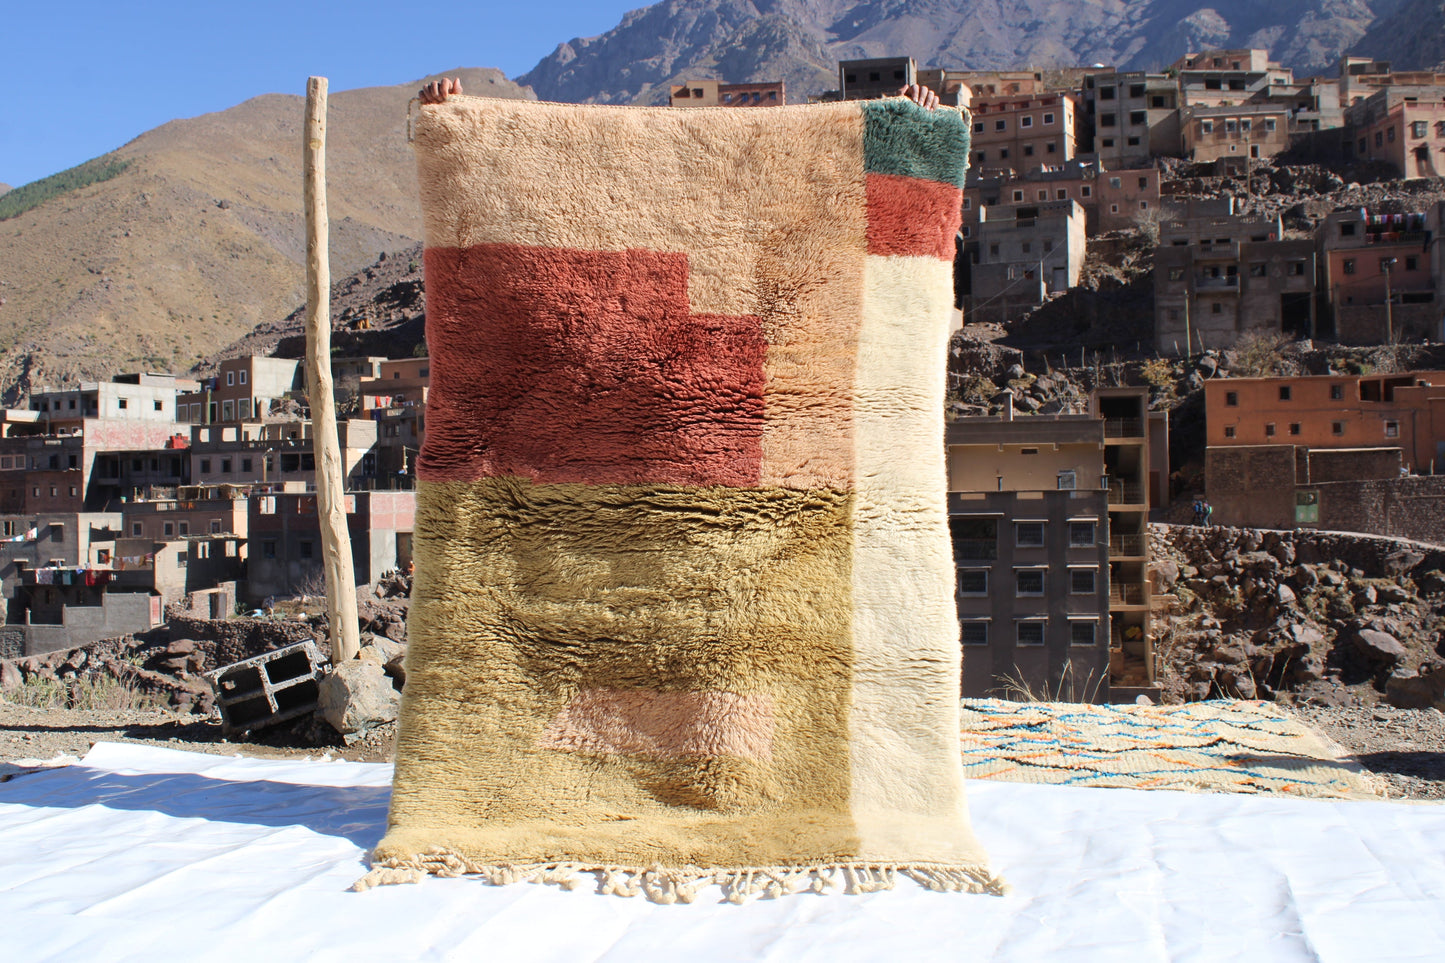 Copy of Beni Ourain rugs originate from the Atlas Mountains of Morocco and are characterized by their distinctive, neutral-toned, and geometric designs. These handwoven rugs often feature a plush pile and are made by the Berber tribes,  size is 190x120cm